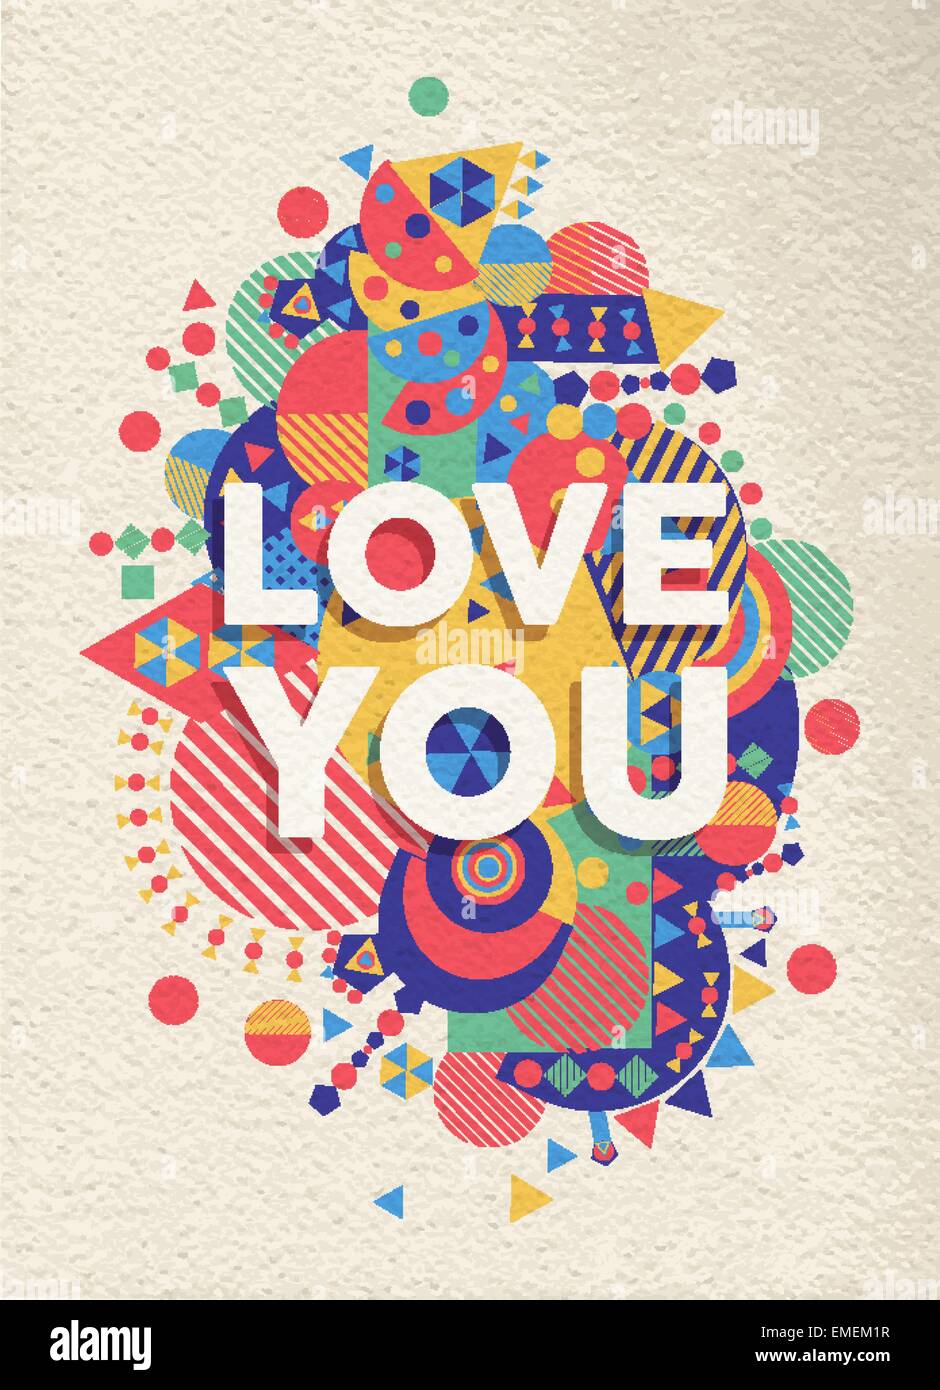 Love you quote poster design Stock Vector